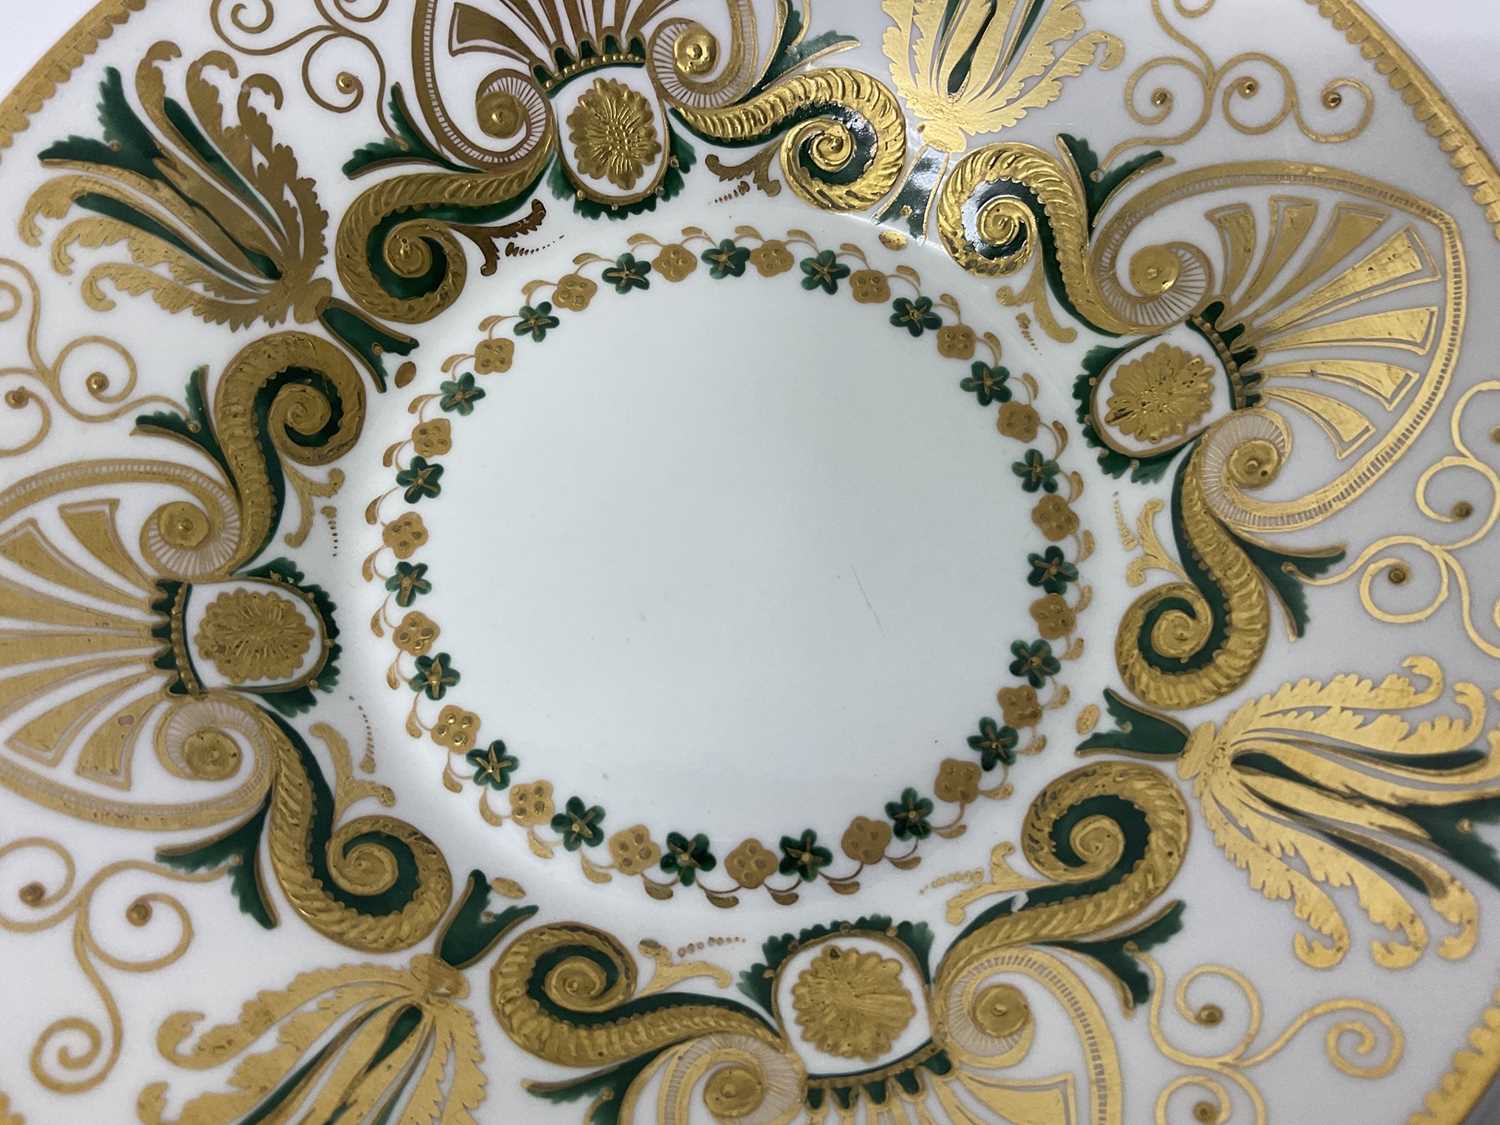 Regency period Spode porcelain saucer dish with good quality gilt and green decoration on white grou - Image 3 of 3